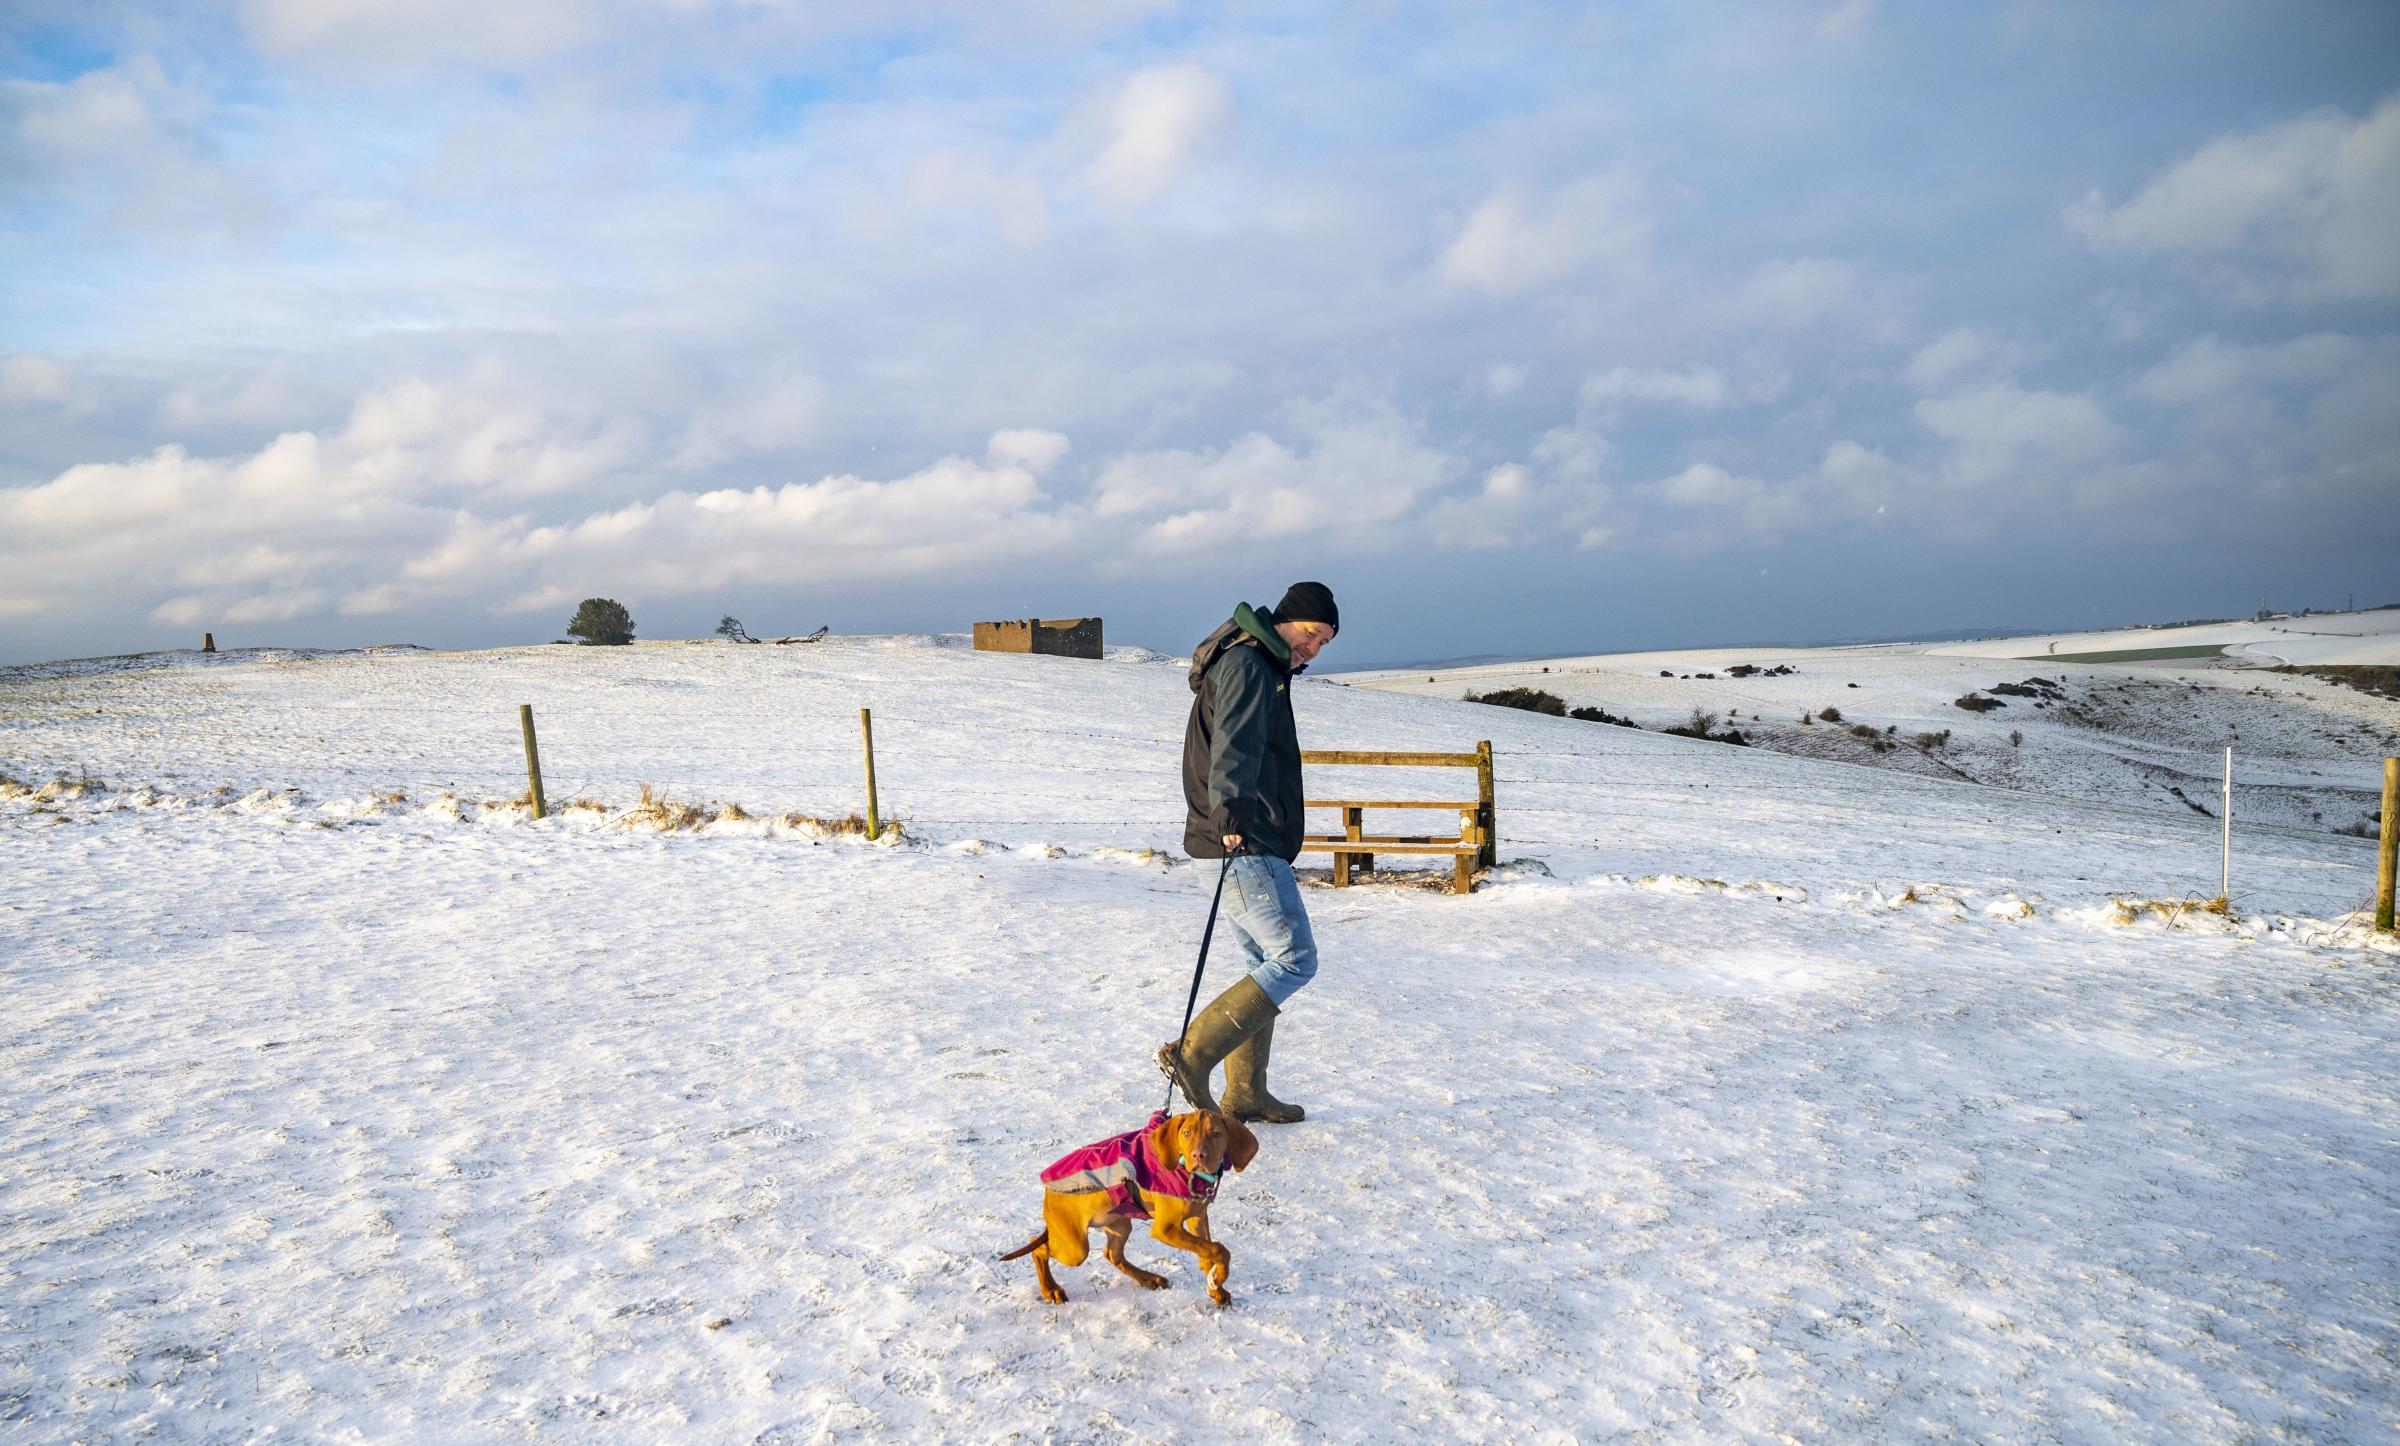 Snow at Devils Dyke on February 9 Credit: Simon Dack